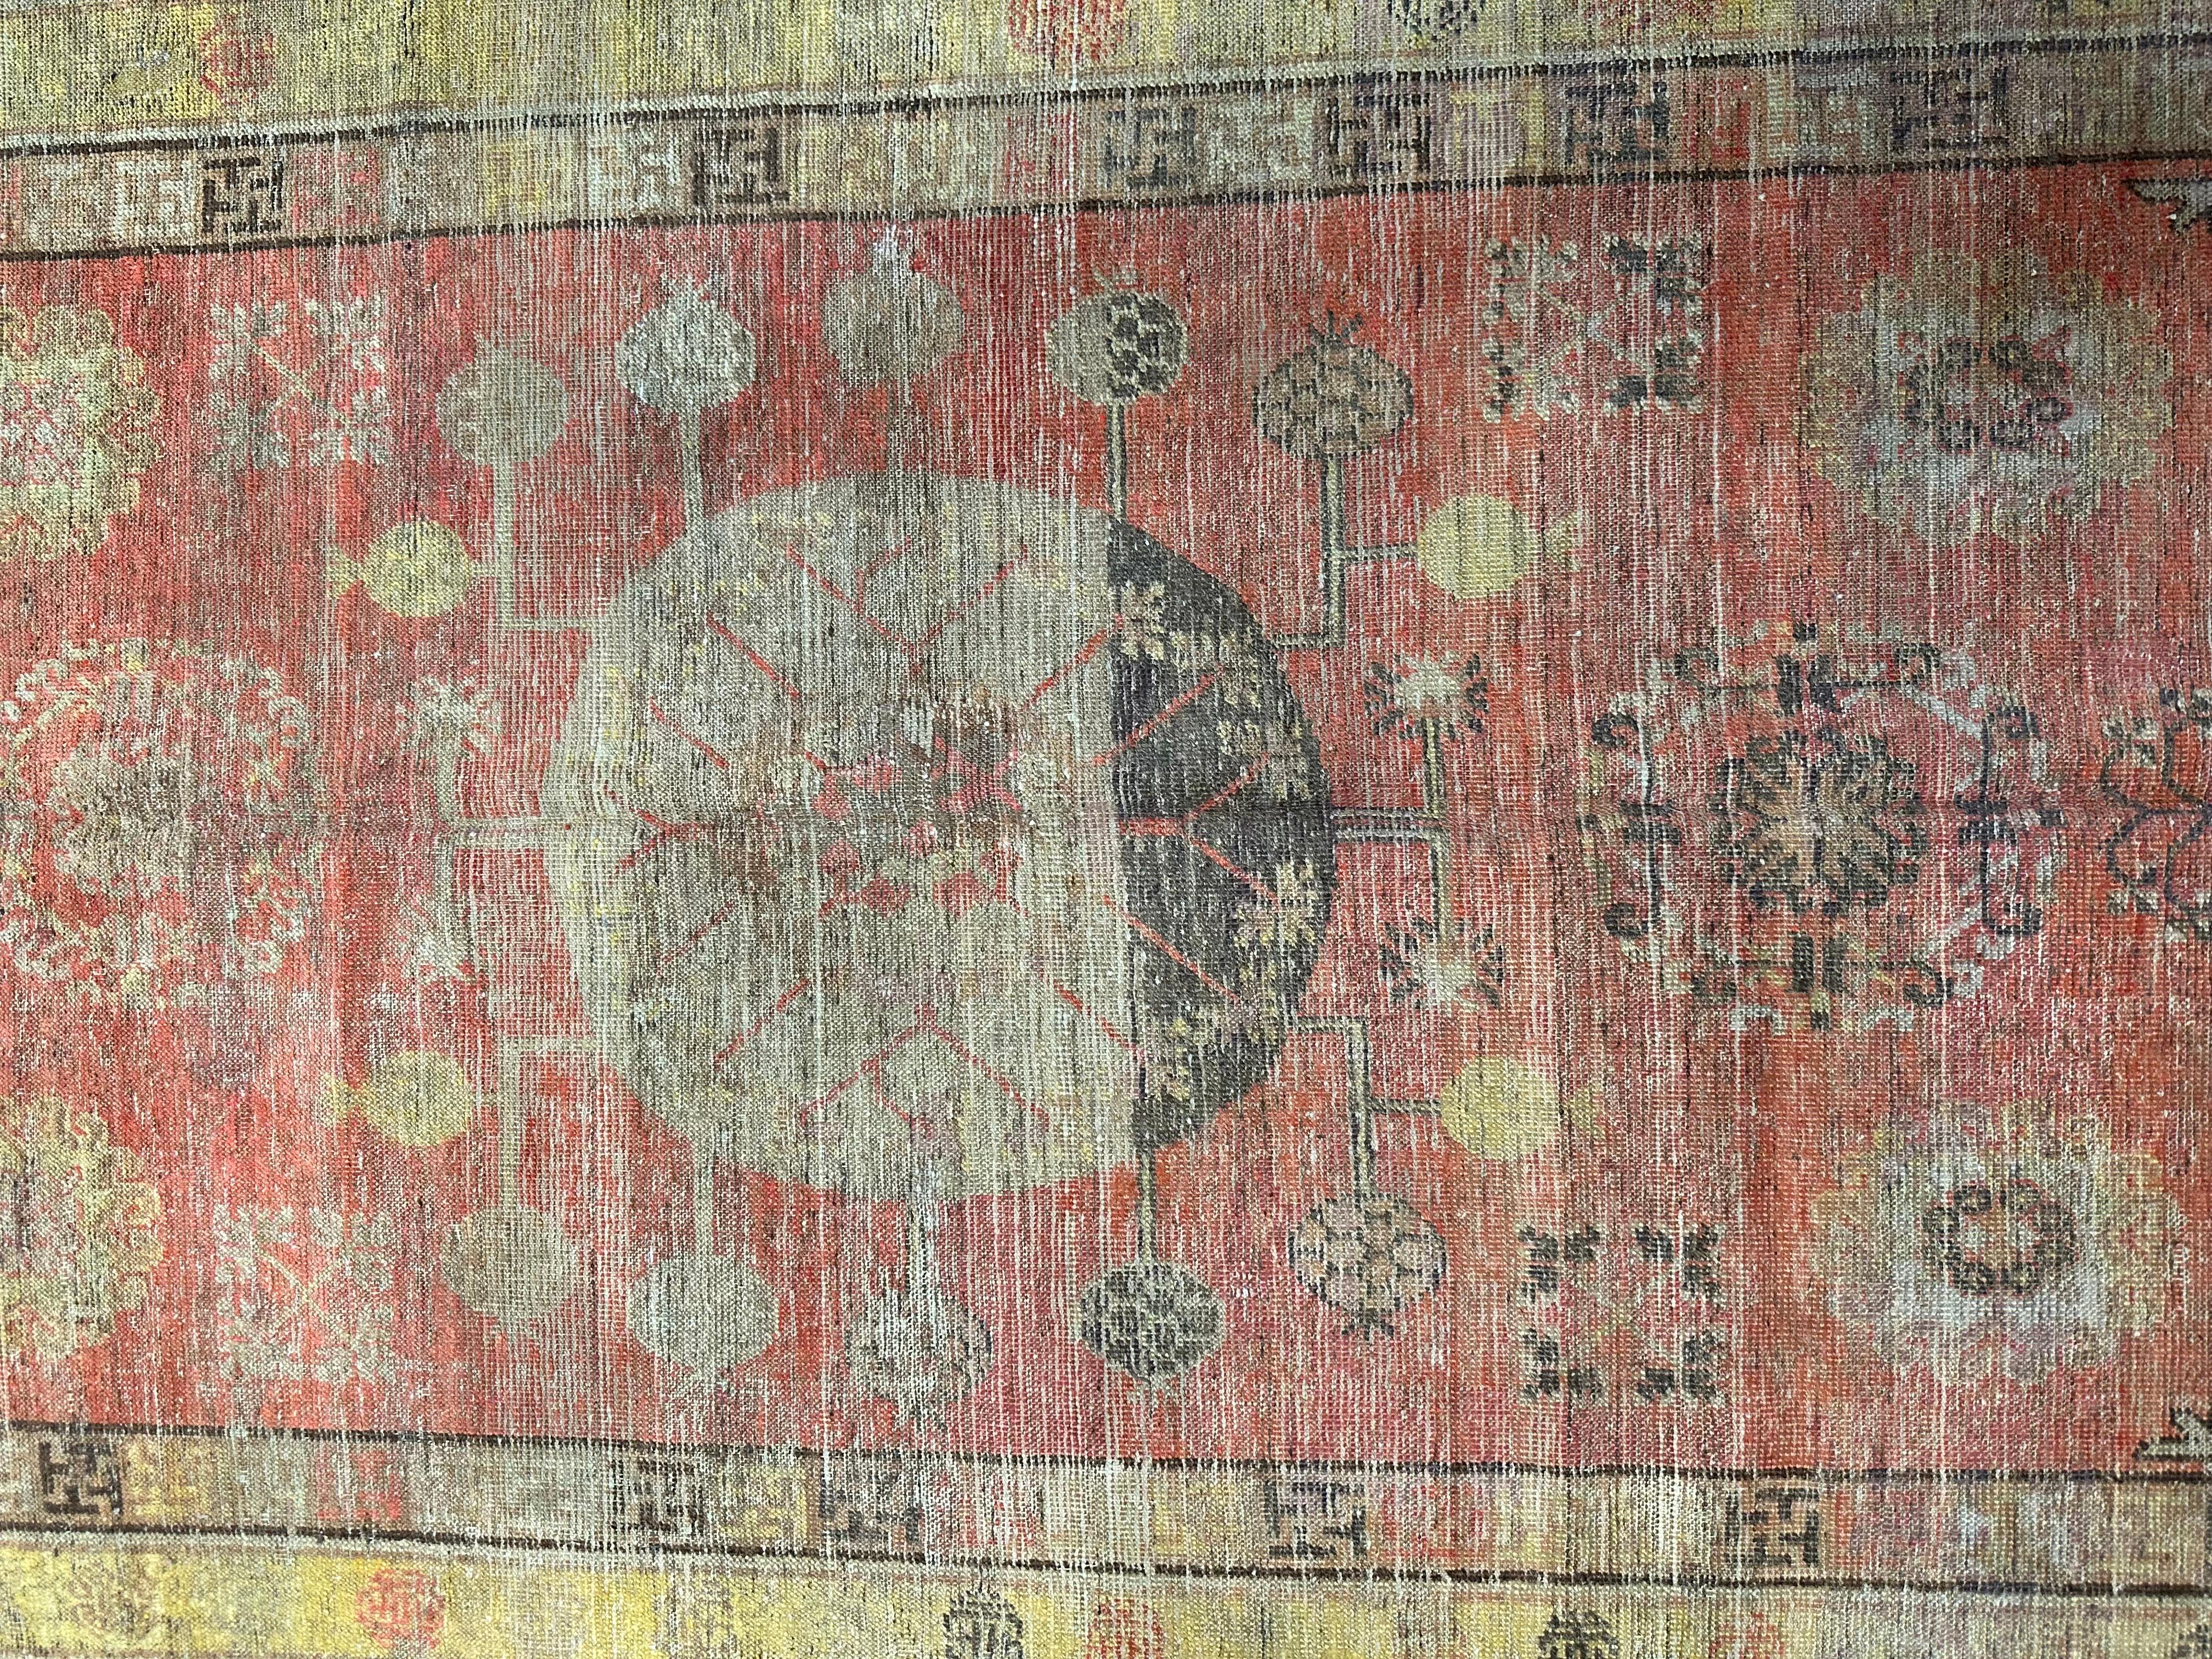 Antique Uzbek Samarkand Rug 8'10'' X 4'7'', tribal and traditional, antique and vintage, wool on cotton foundation